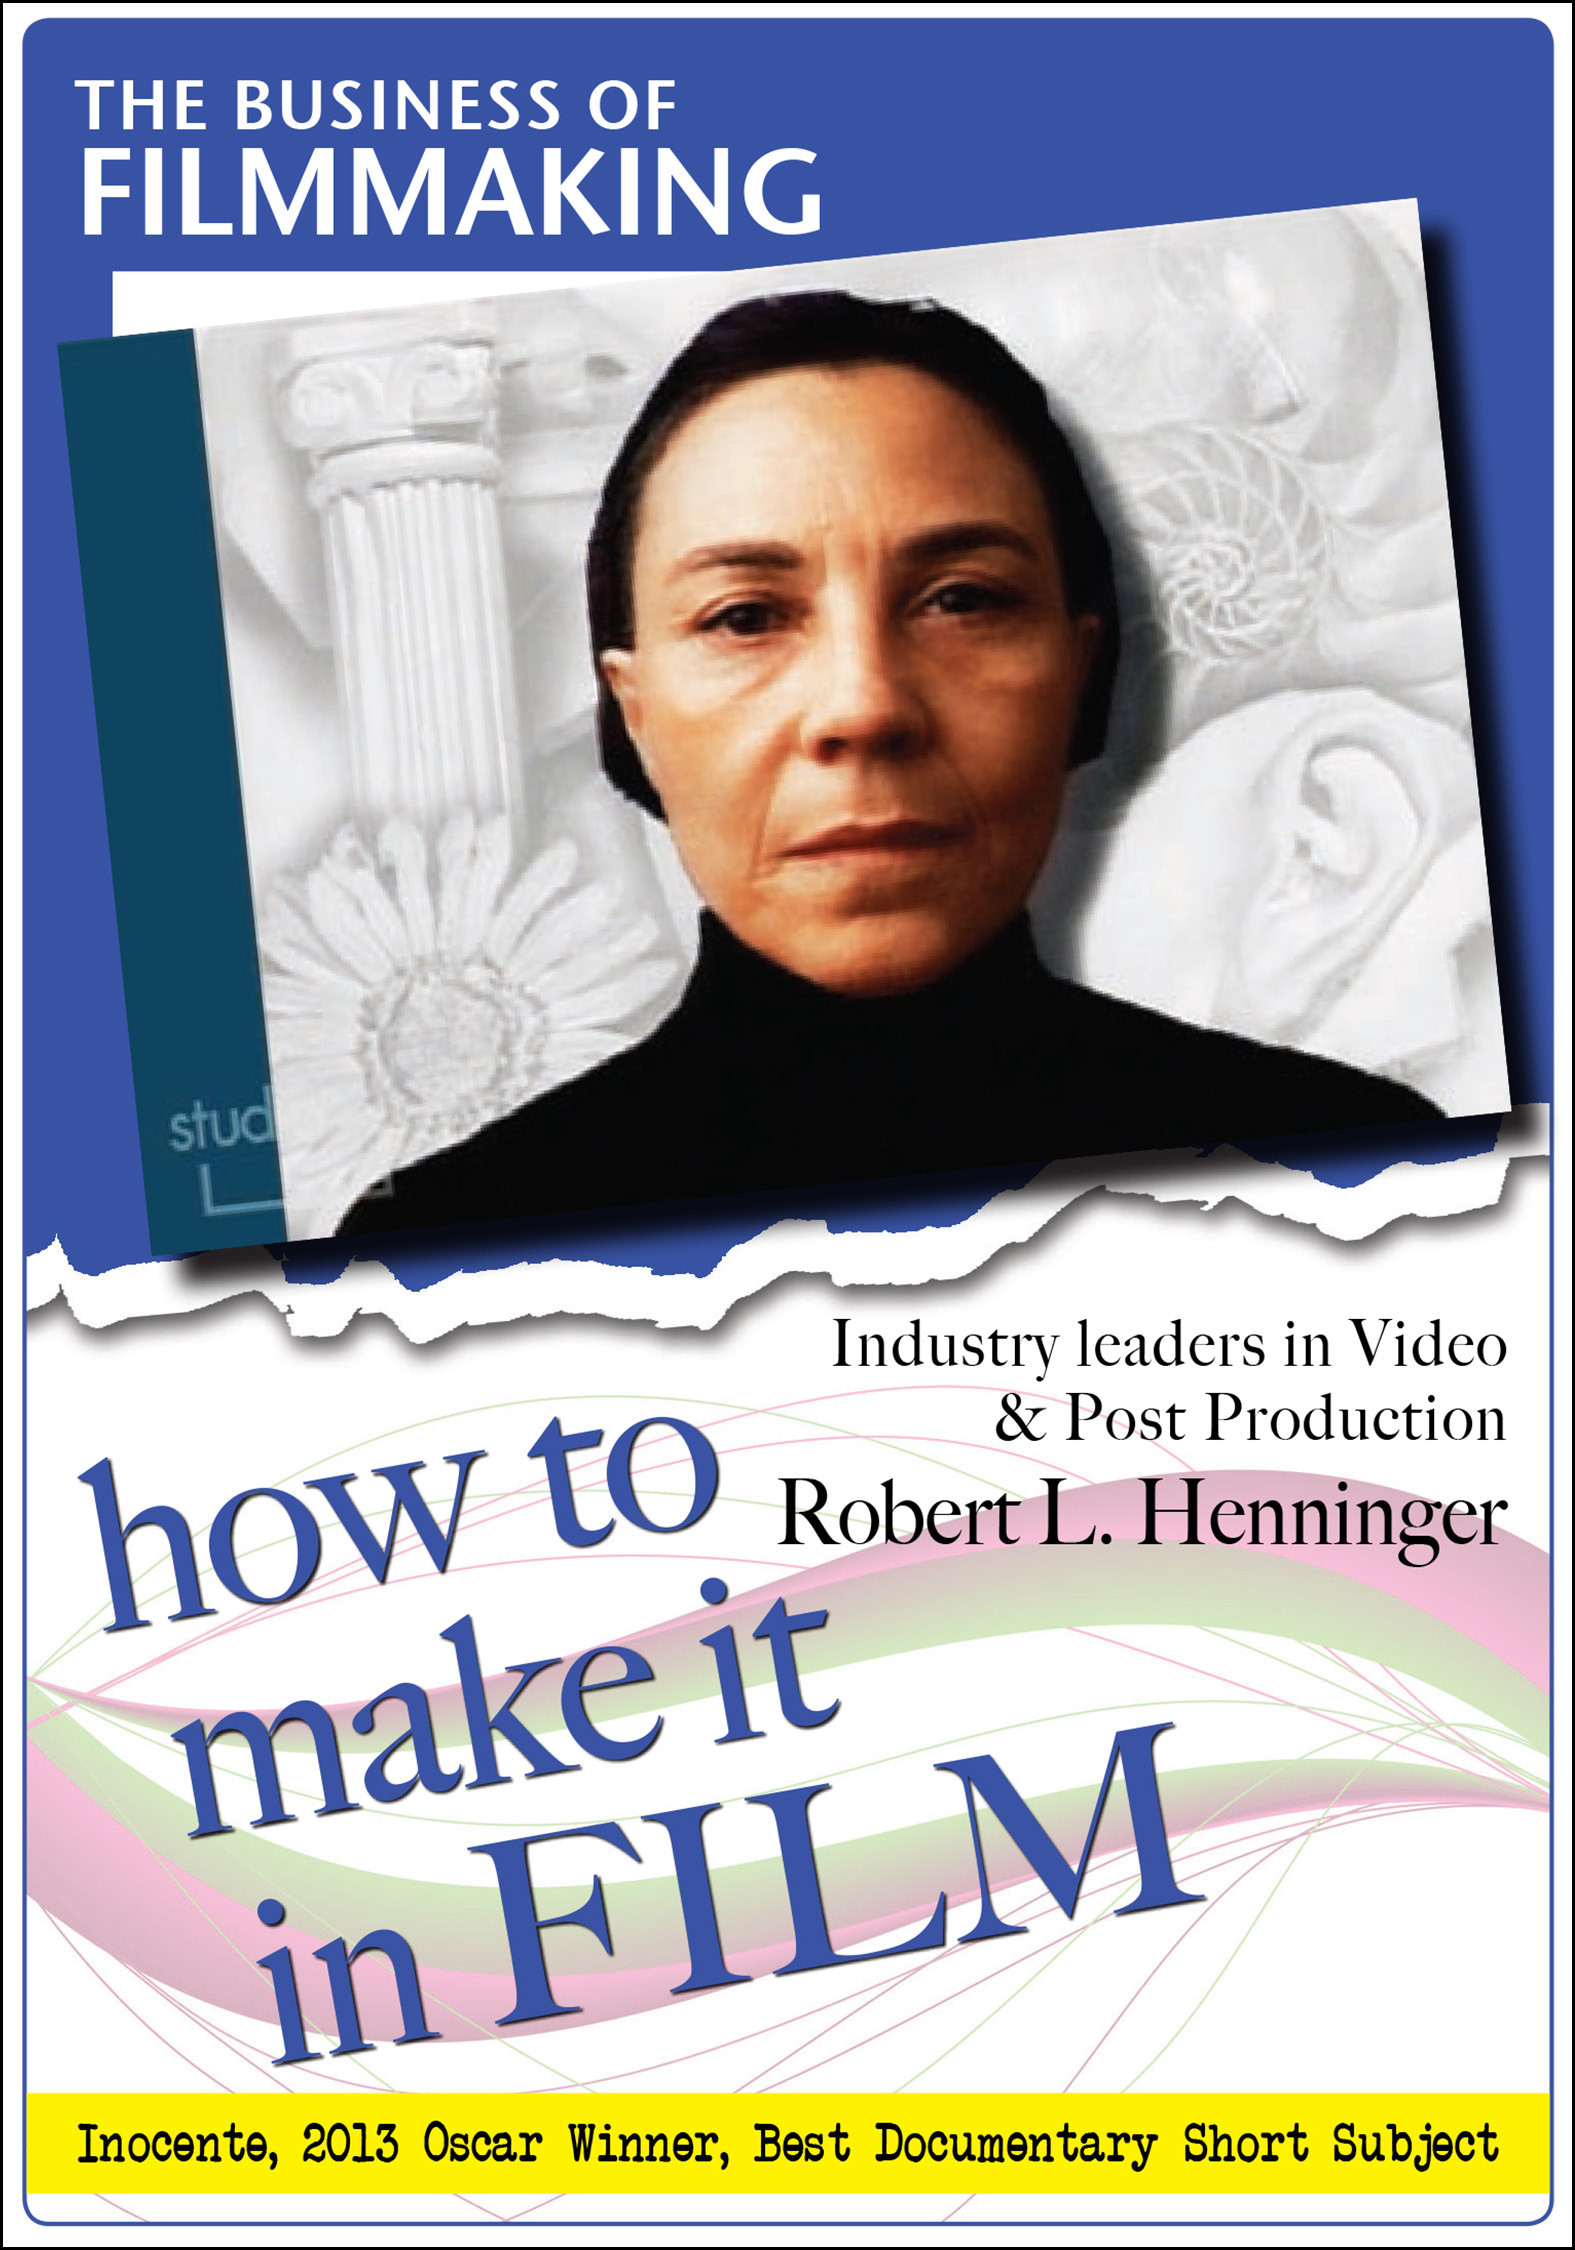 F2834 - The Business of Film with Video & Post Production with Robert L. Henninger